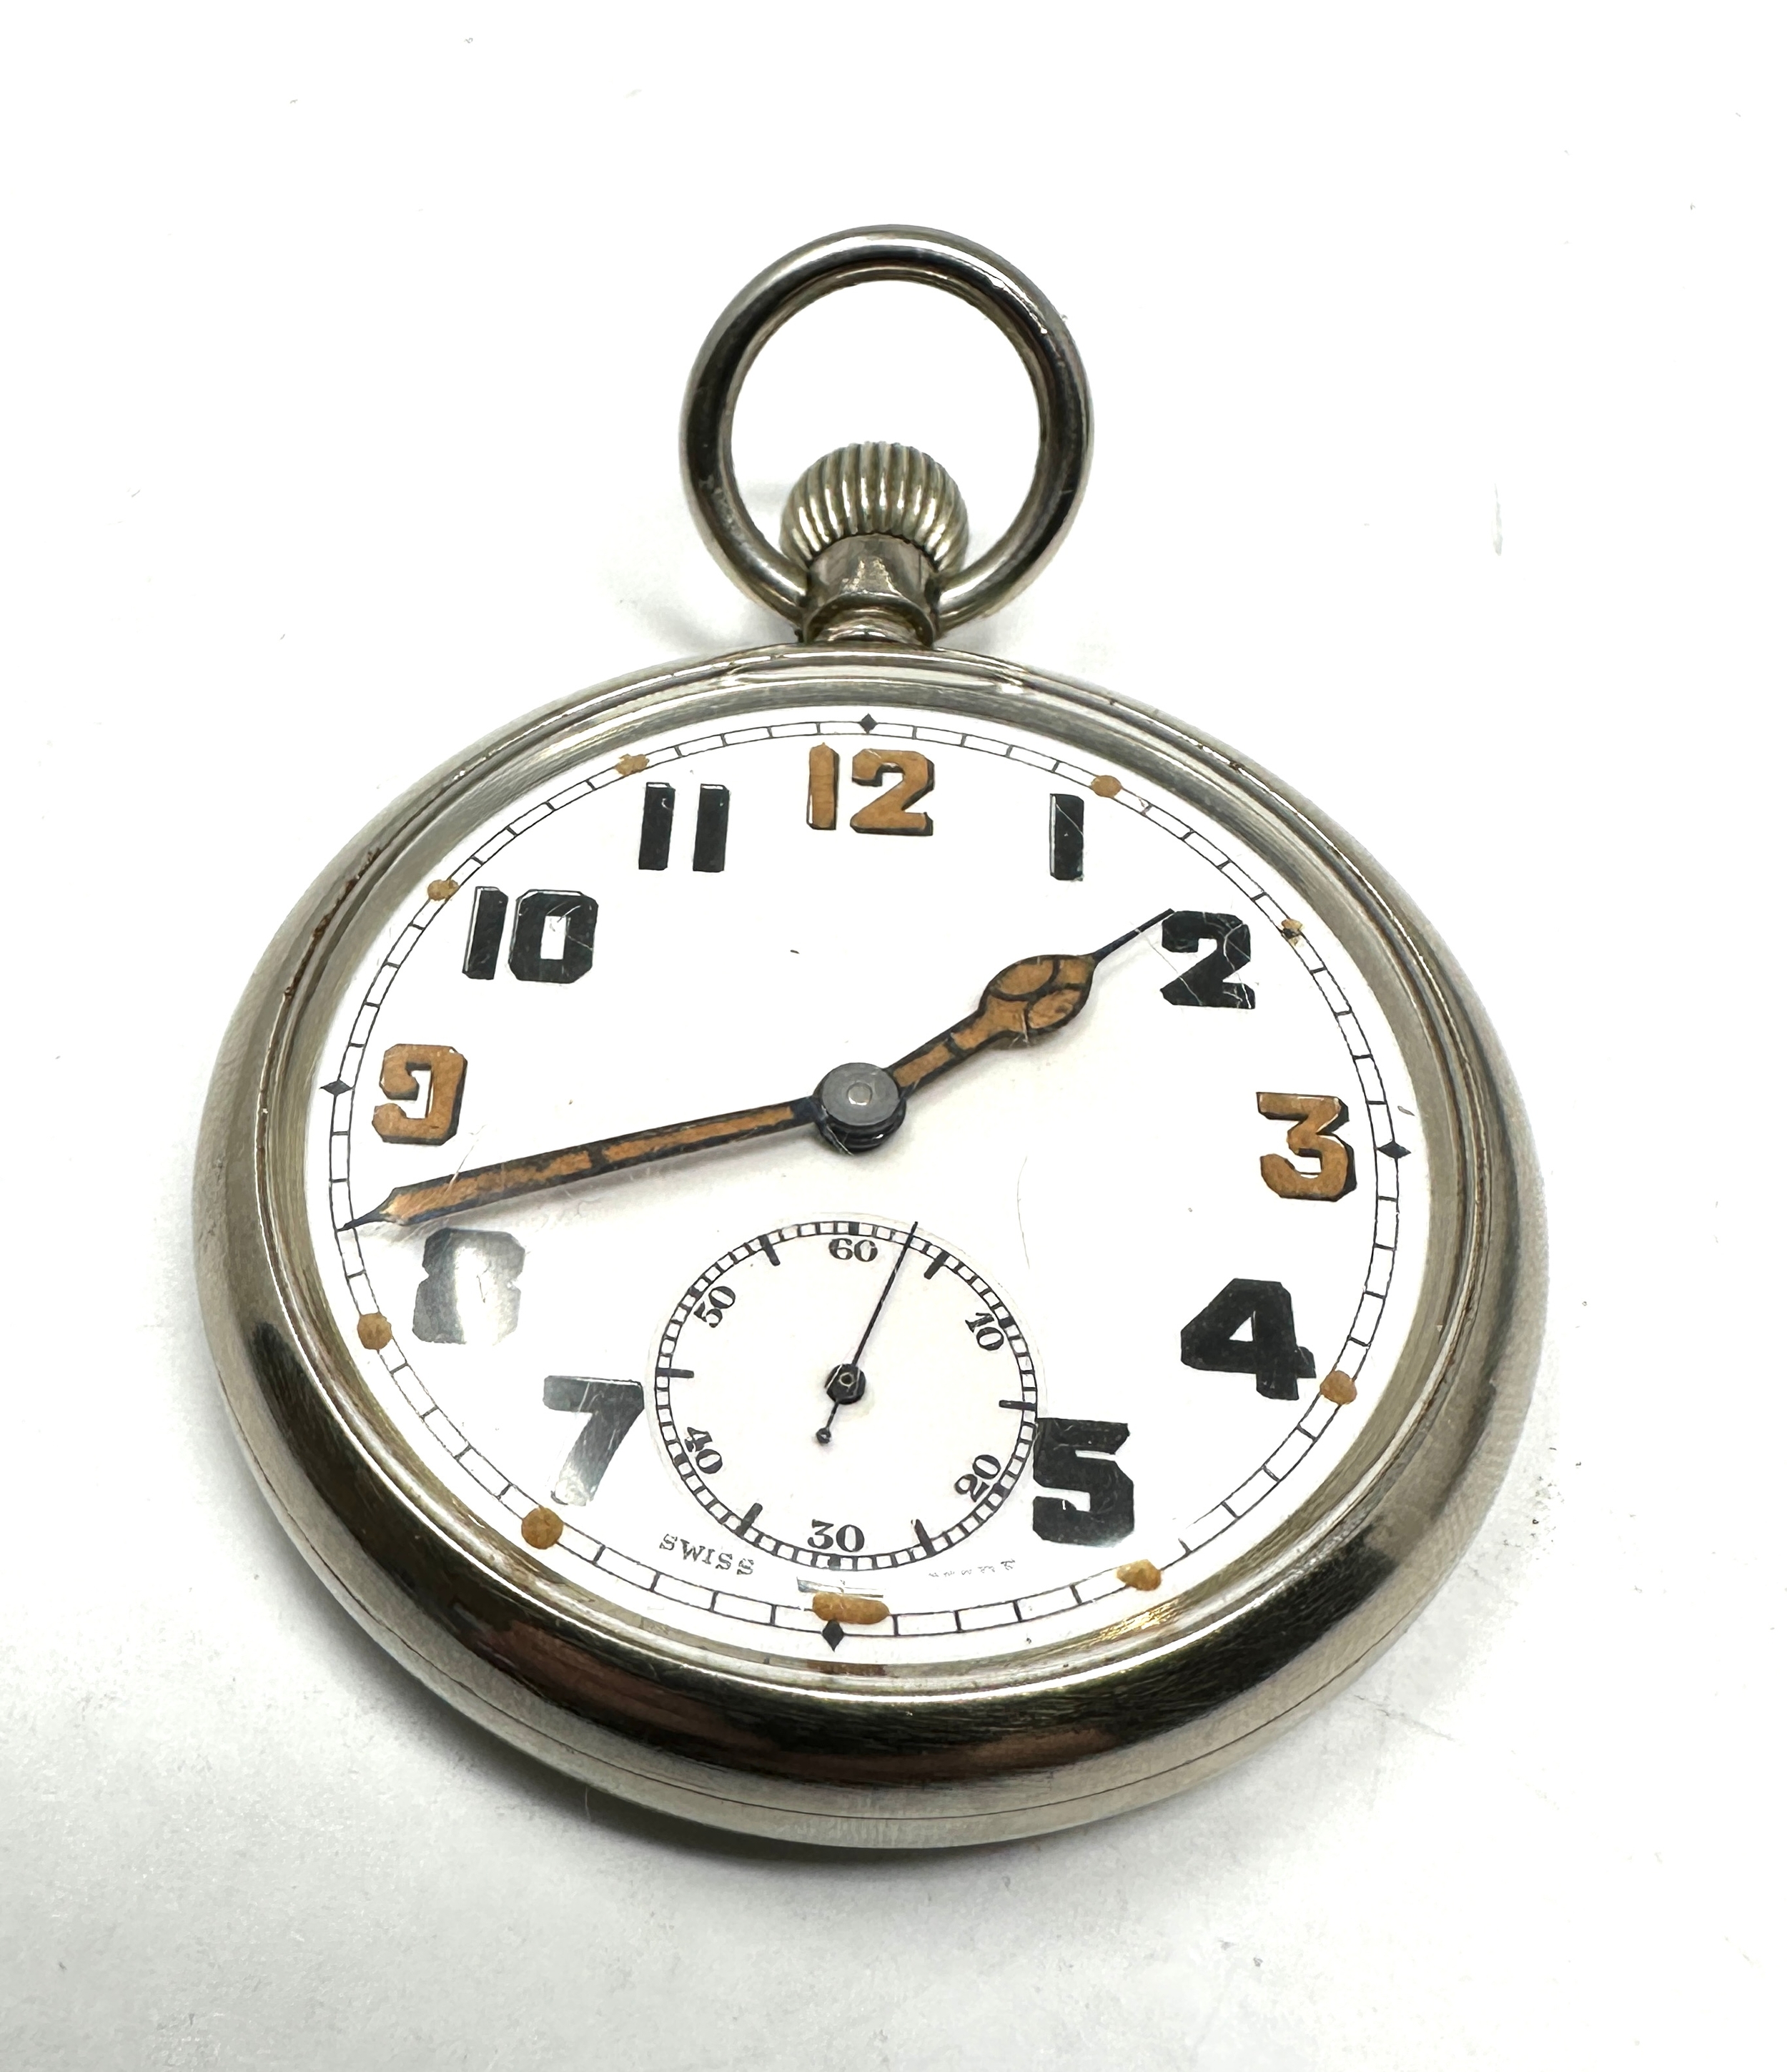 ww2 military pocket watch the watch is not ticking